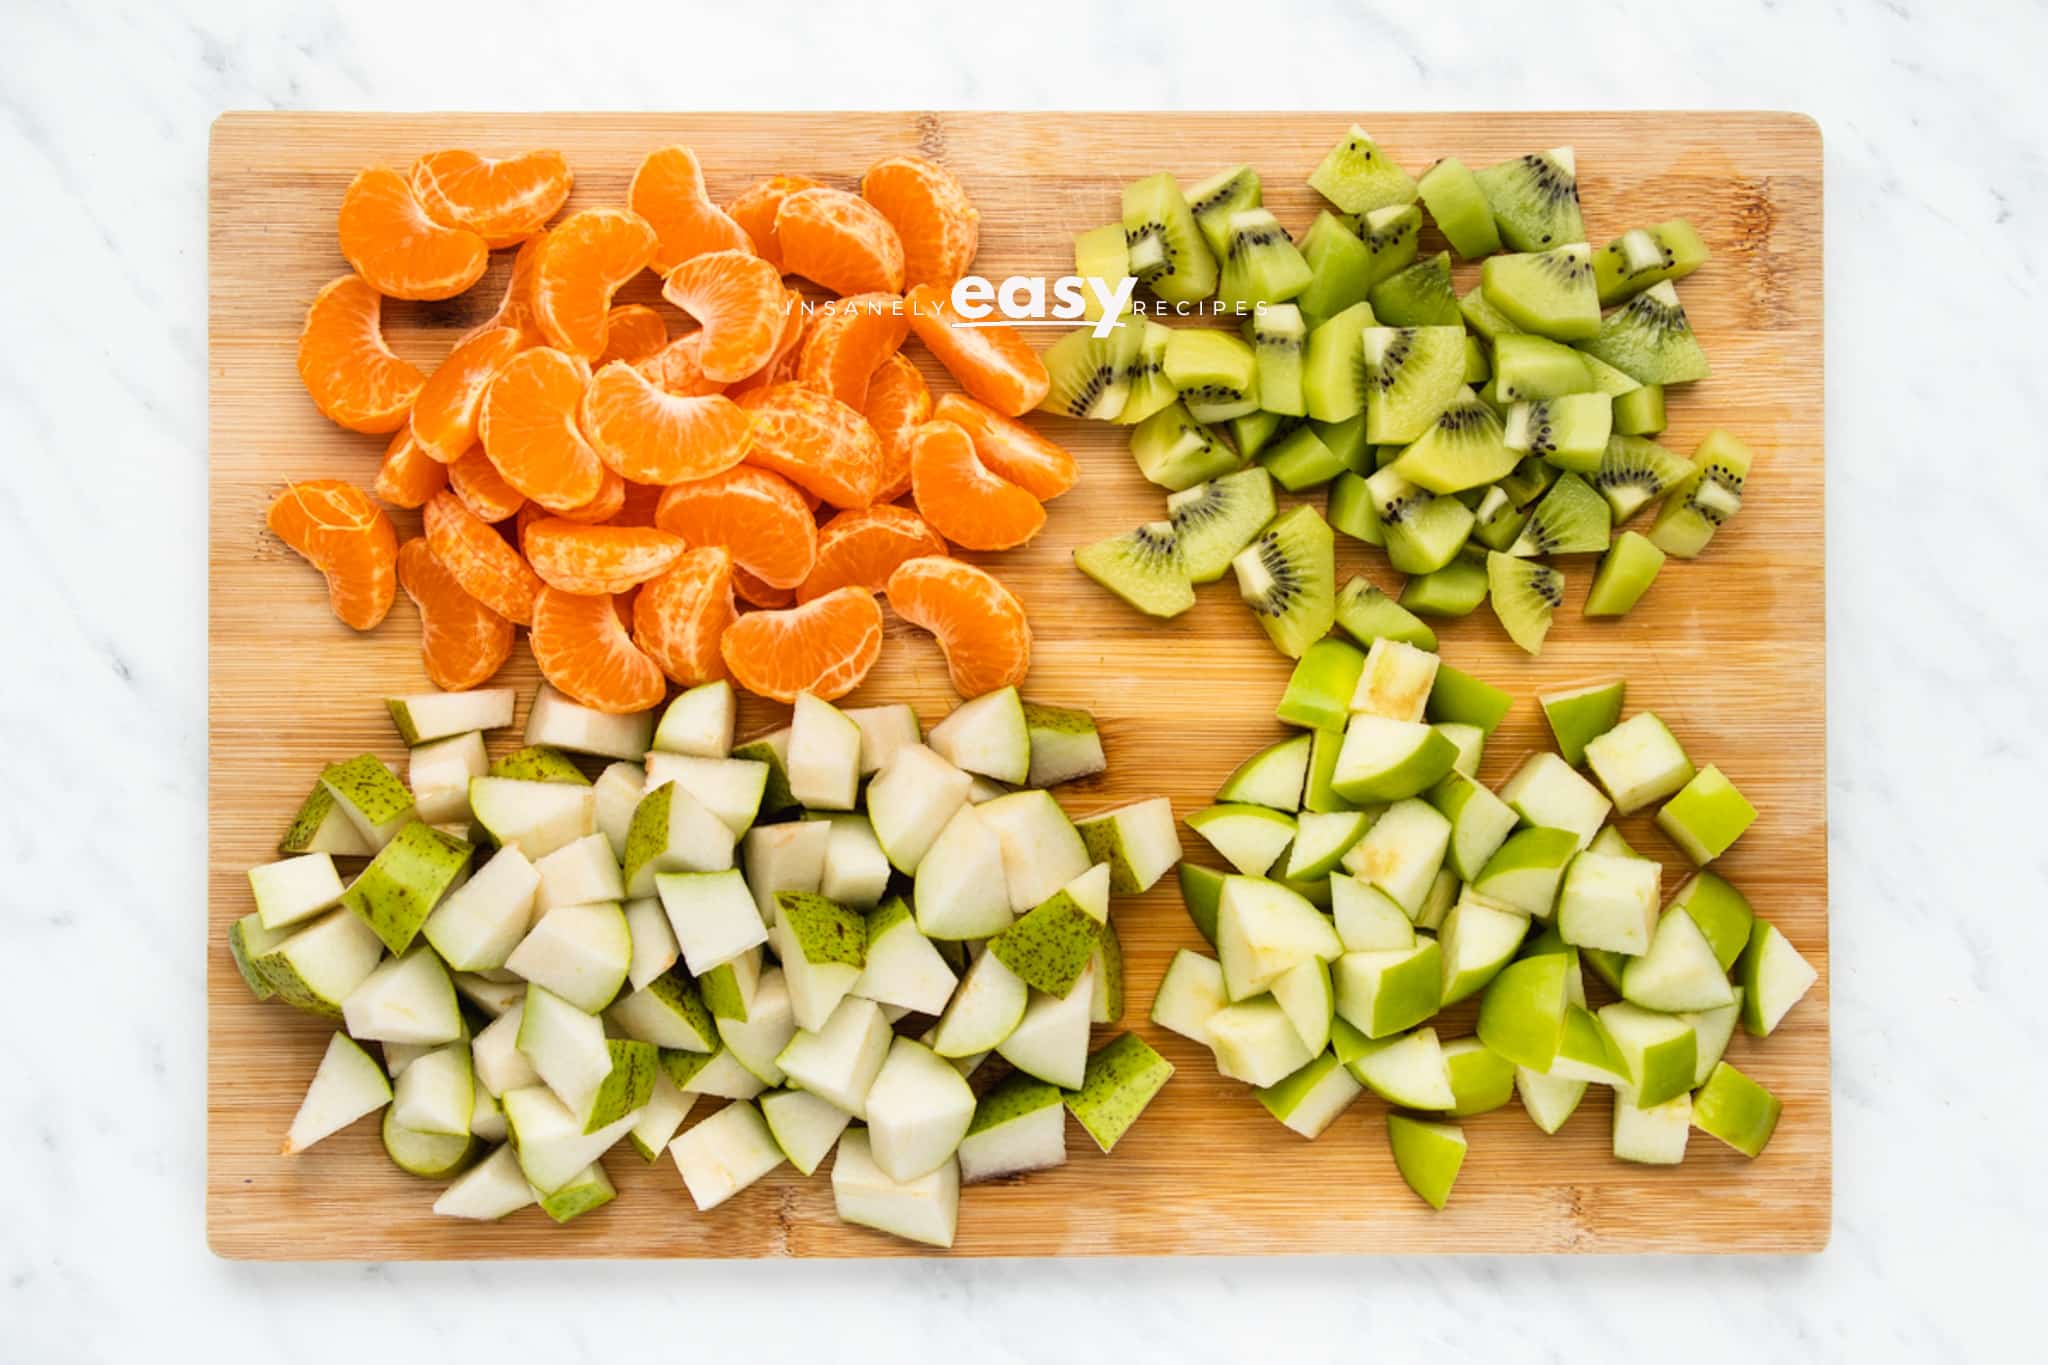 diced oranges and apples and kiwi on cutting board